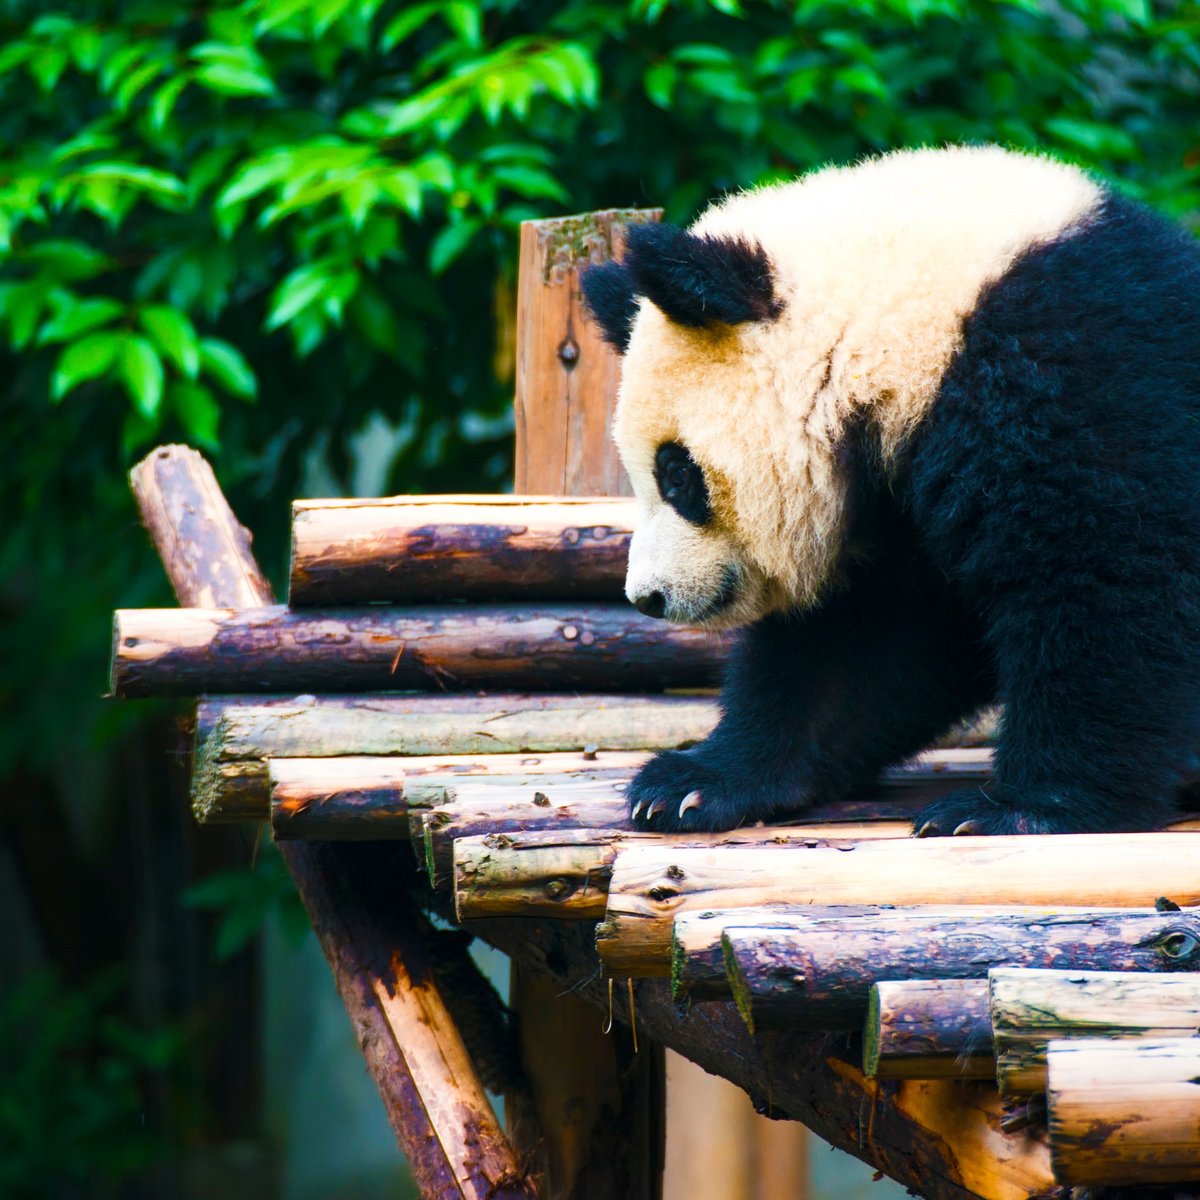 get up close to China's most famous native animal- the Giant Panda!